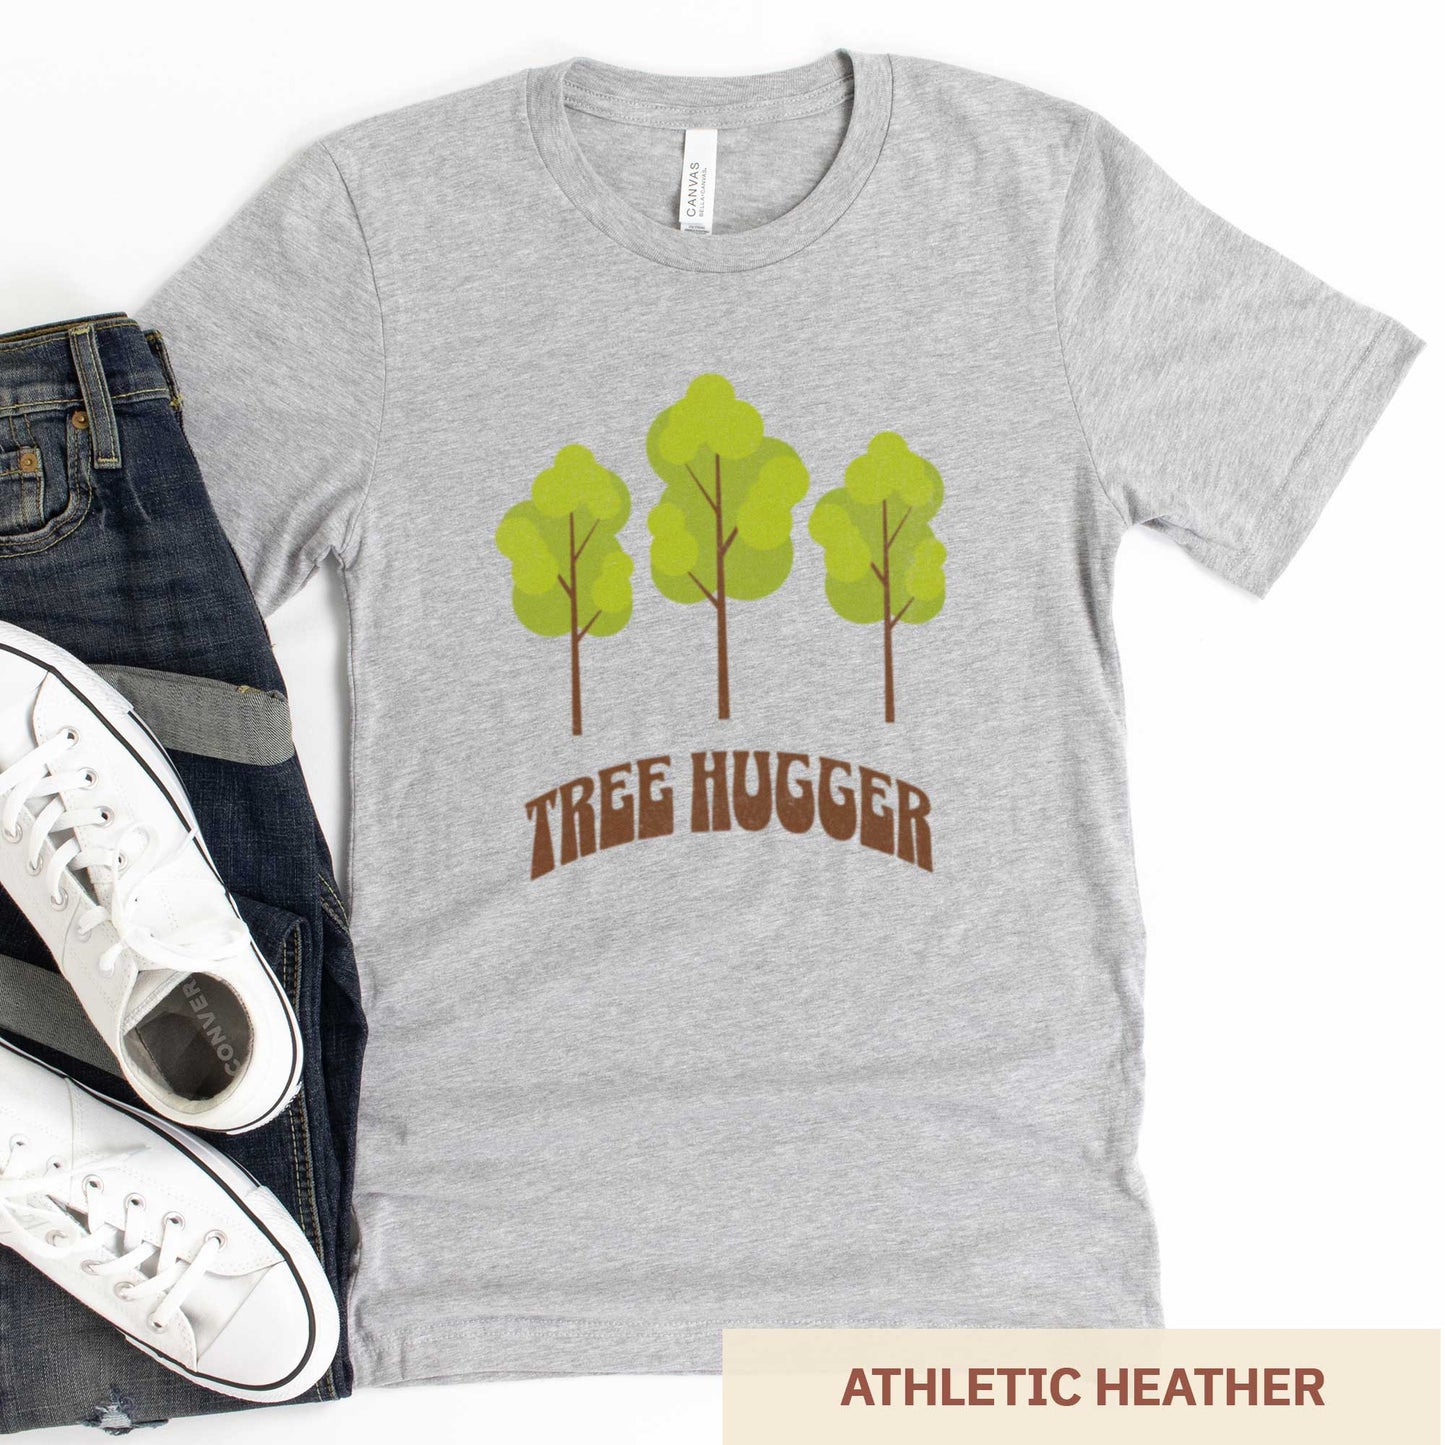 An athletic heather Bella Canvas t-shirt featuring three trees and the words tree hugger.